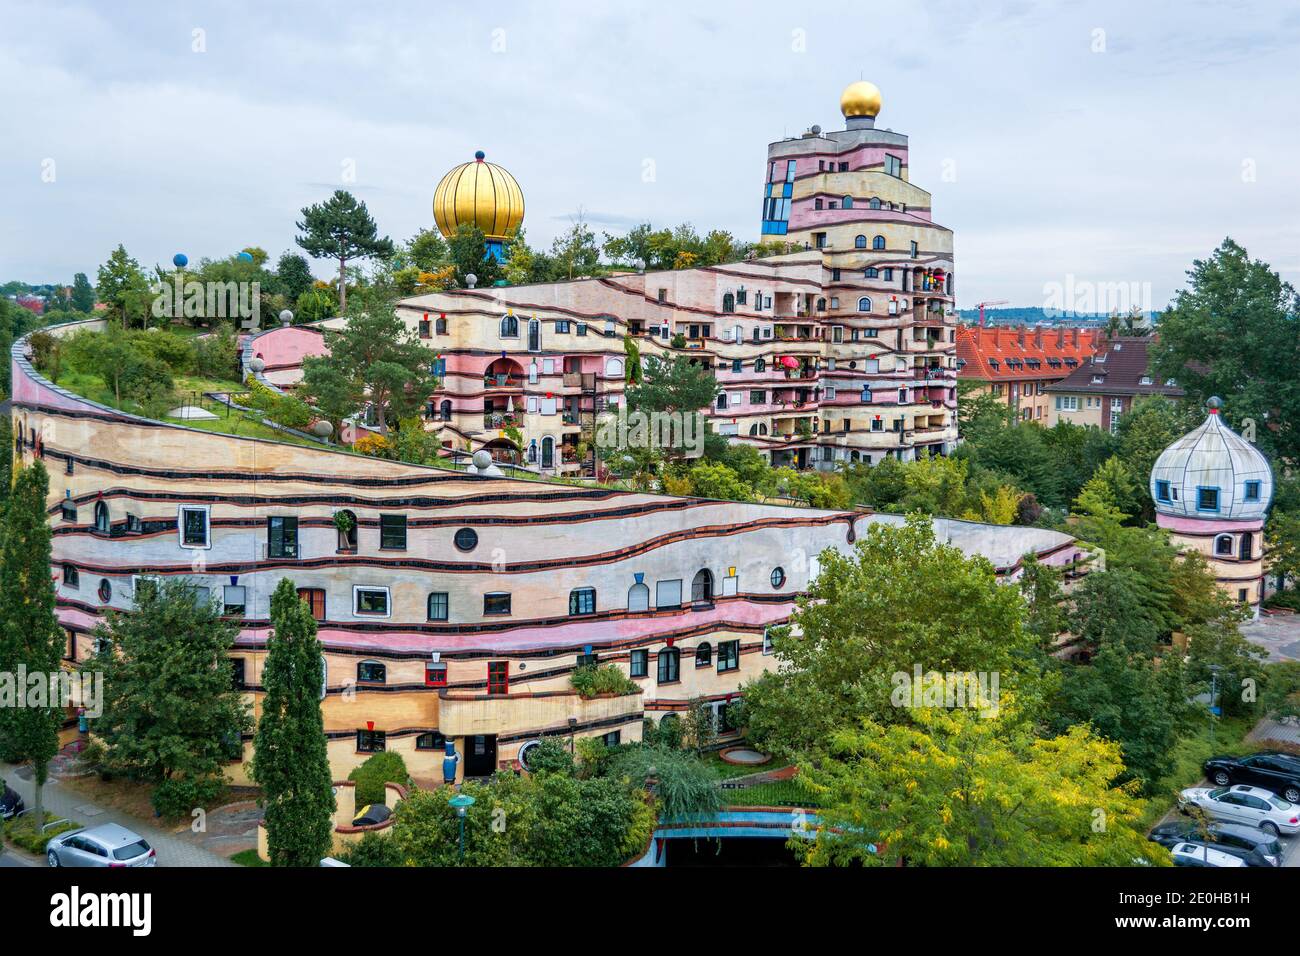 The Building Waldspirale by the Architect Hundertwasser in Darmstadt (Germany) Stock Photo